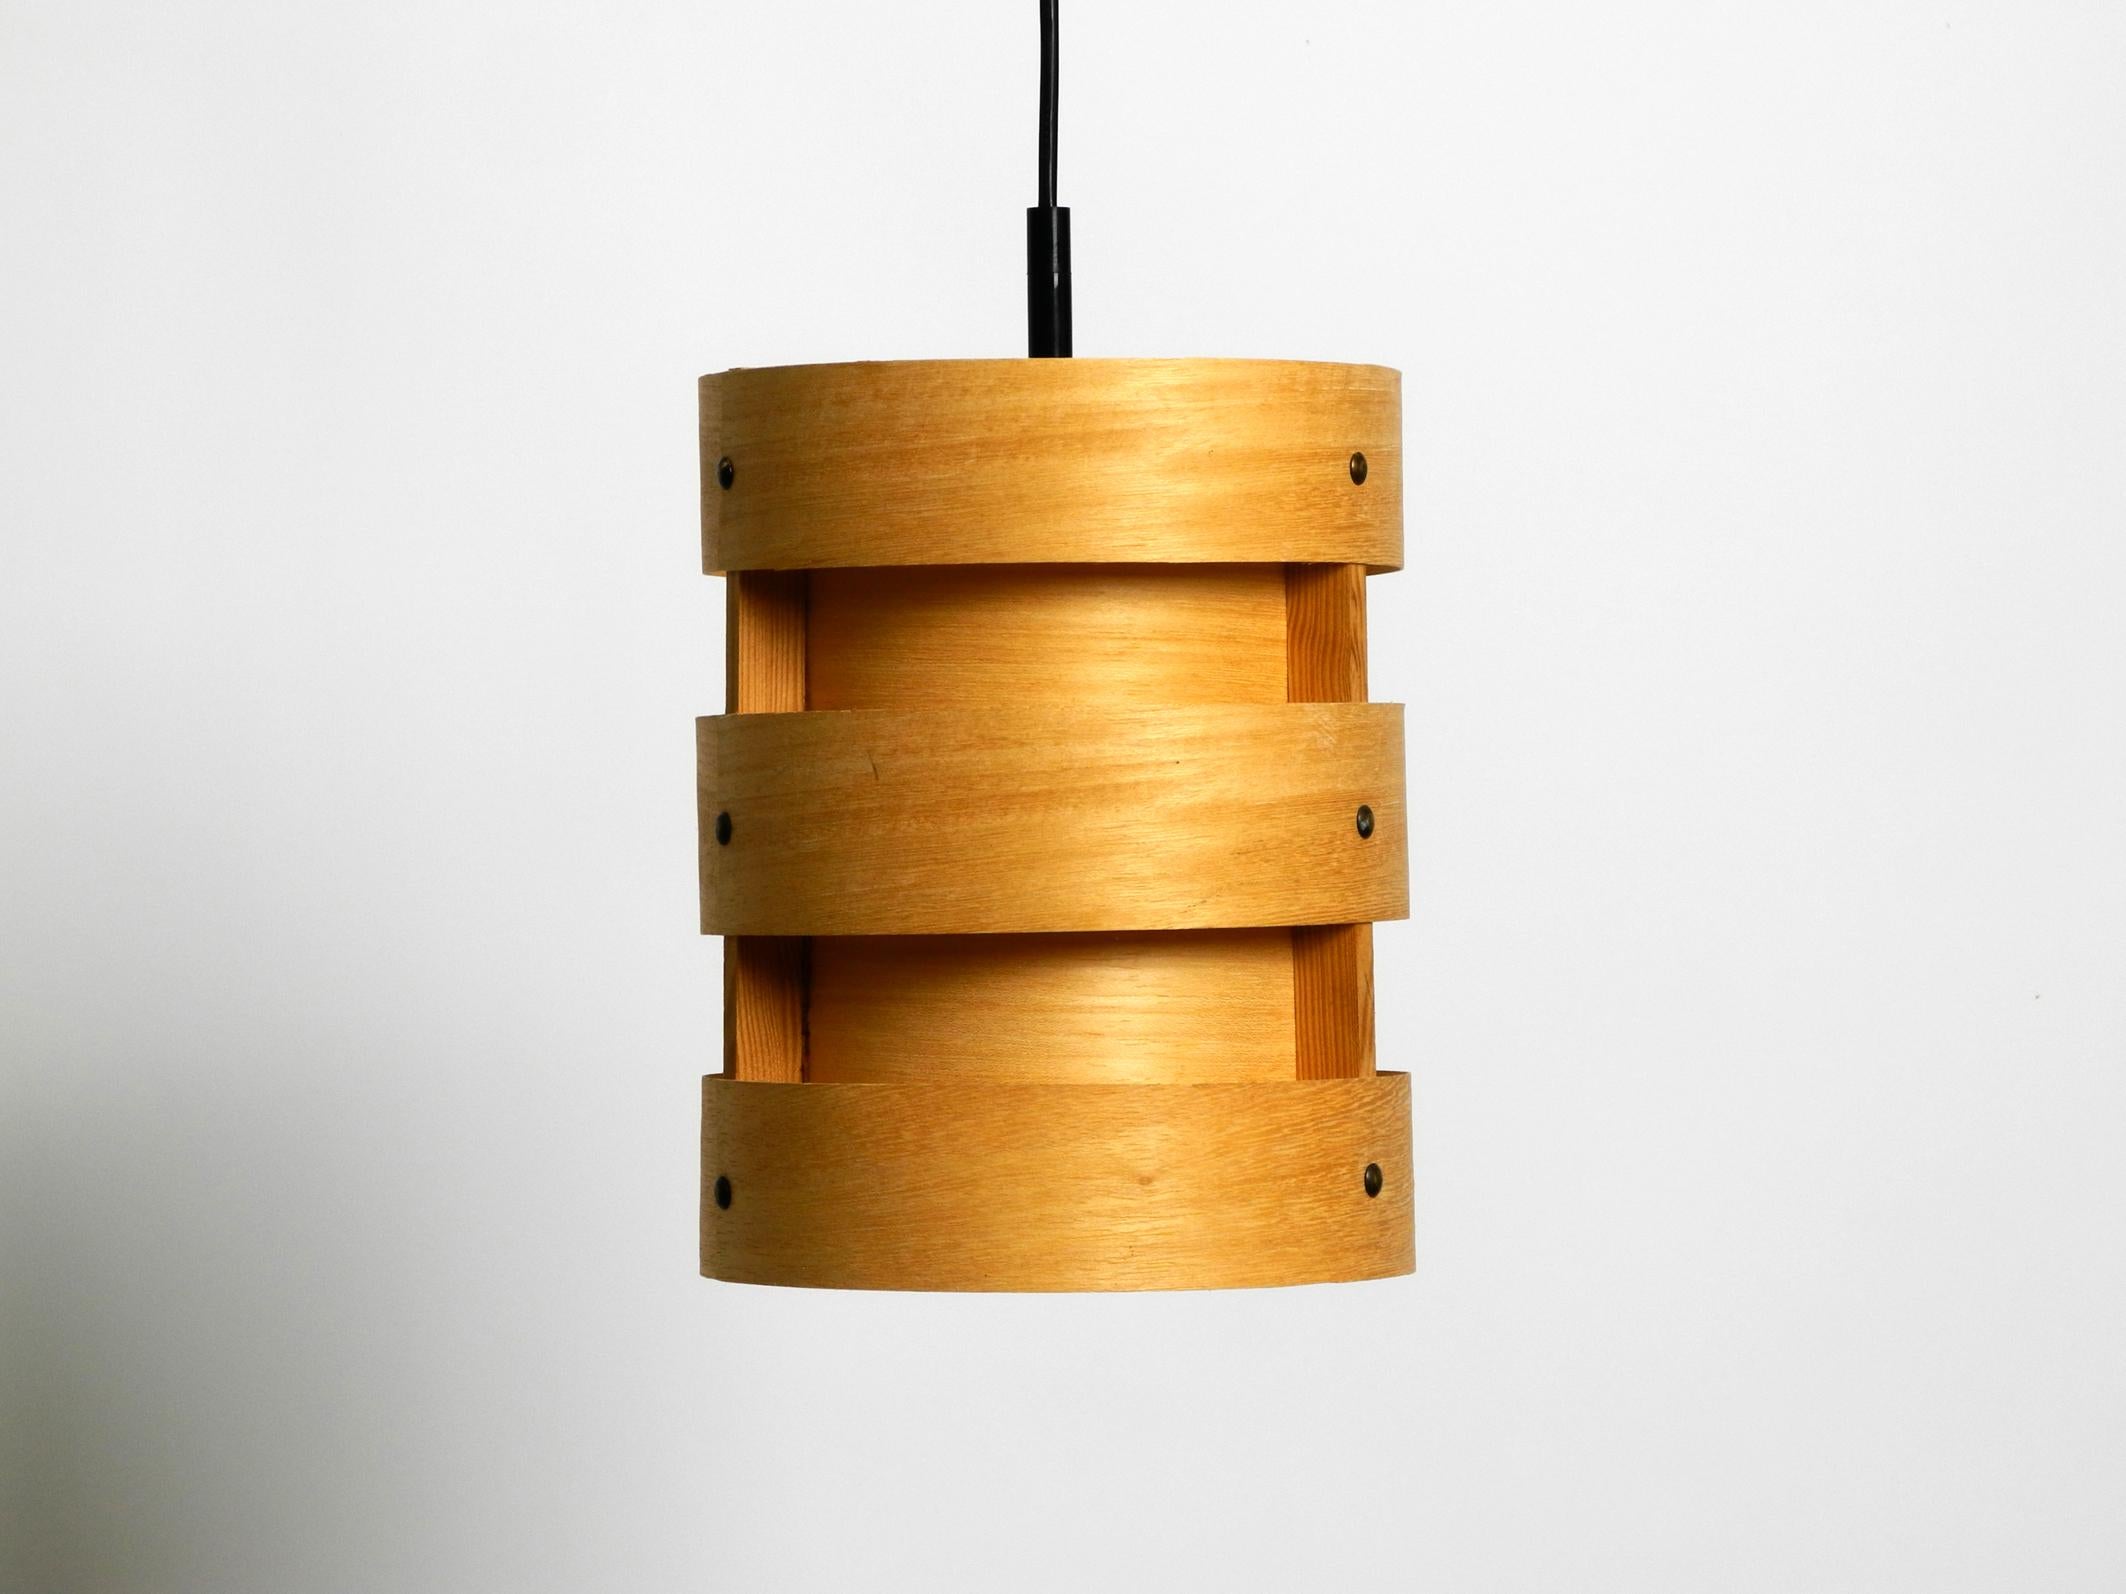 Beautiful 1960s round slat pendant lamp made of bent plywood.
Manufacturer is Zicoli. Made in Germany.
Very nice design for indirect light. From the Hans Agne Jakobsson era.
Very good vintage condition and fully functional.
In perfect condition. No